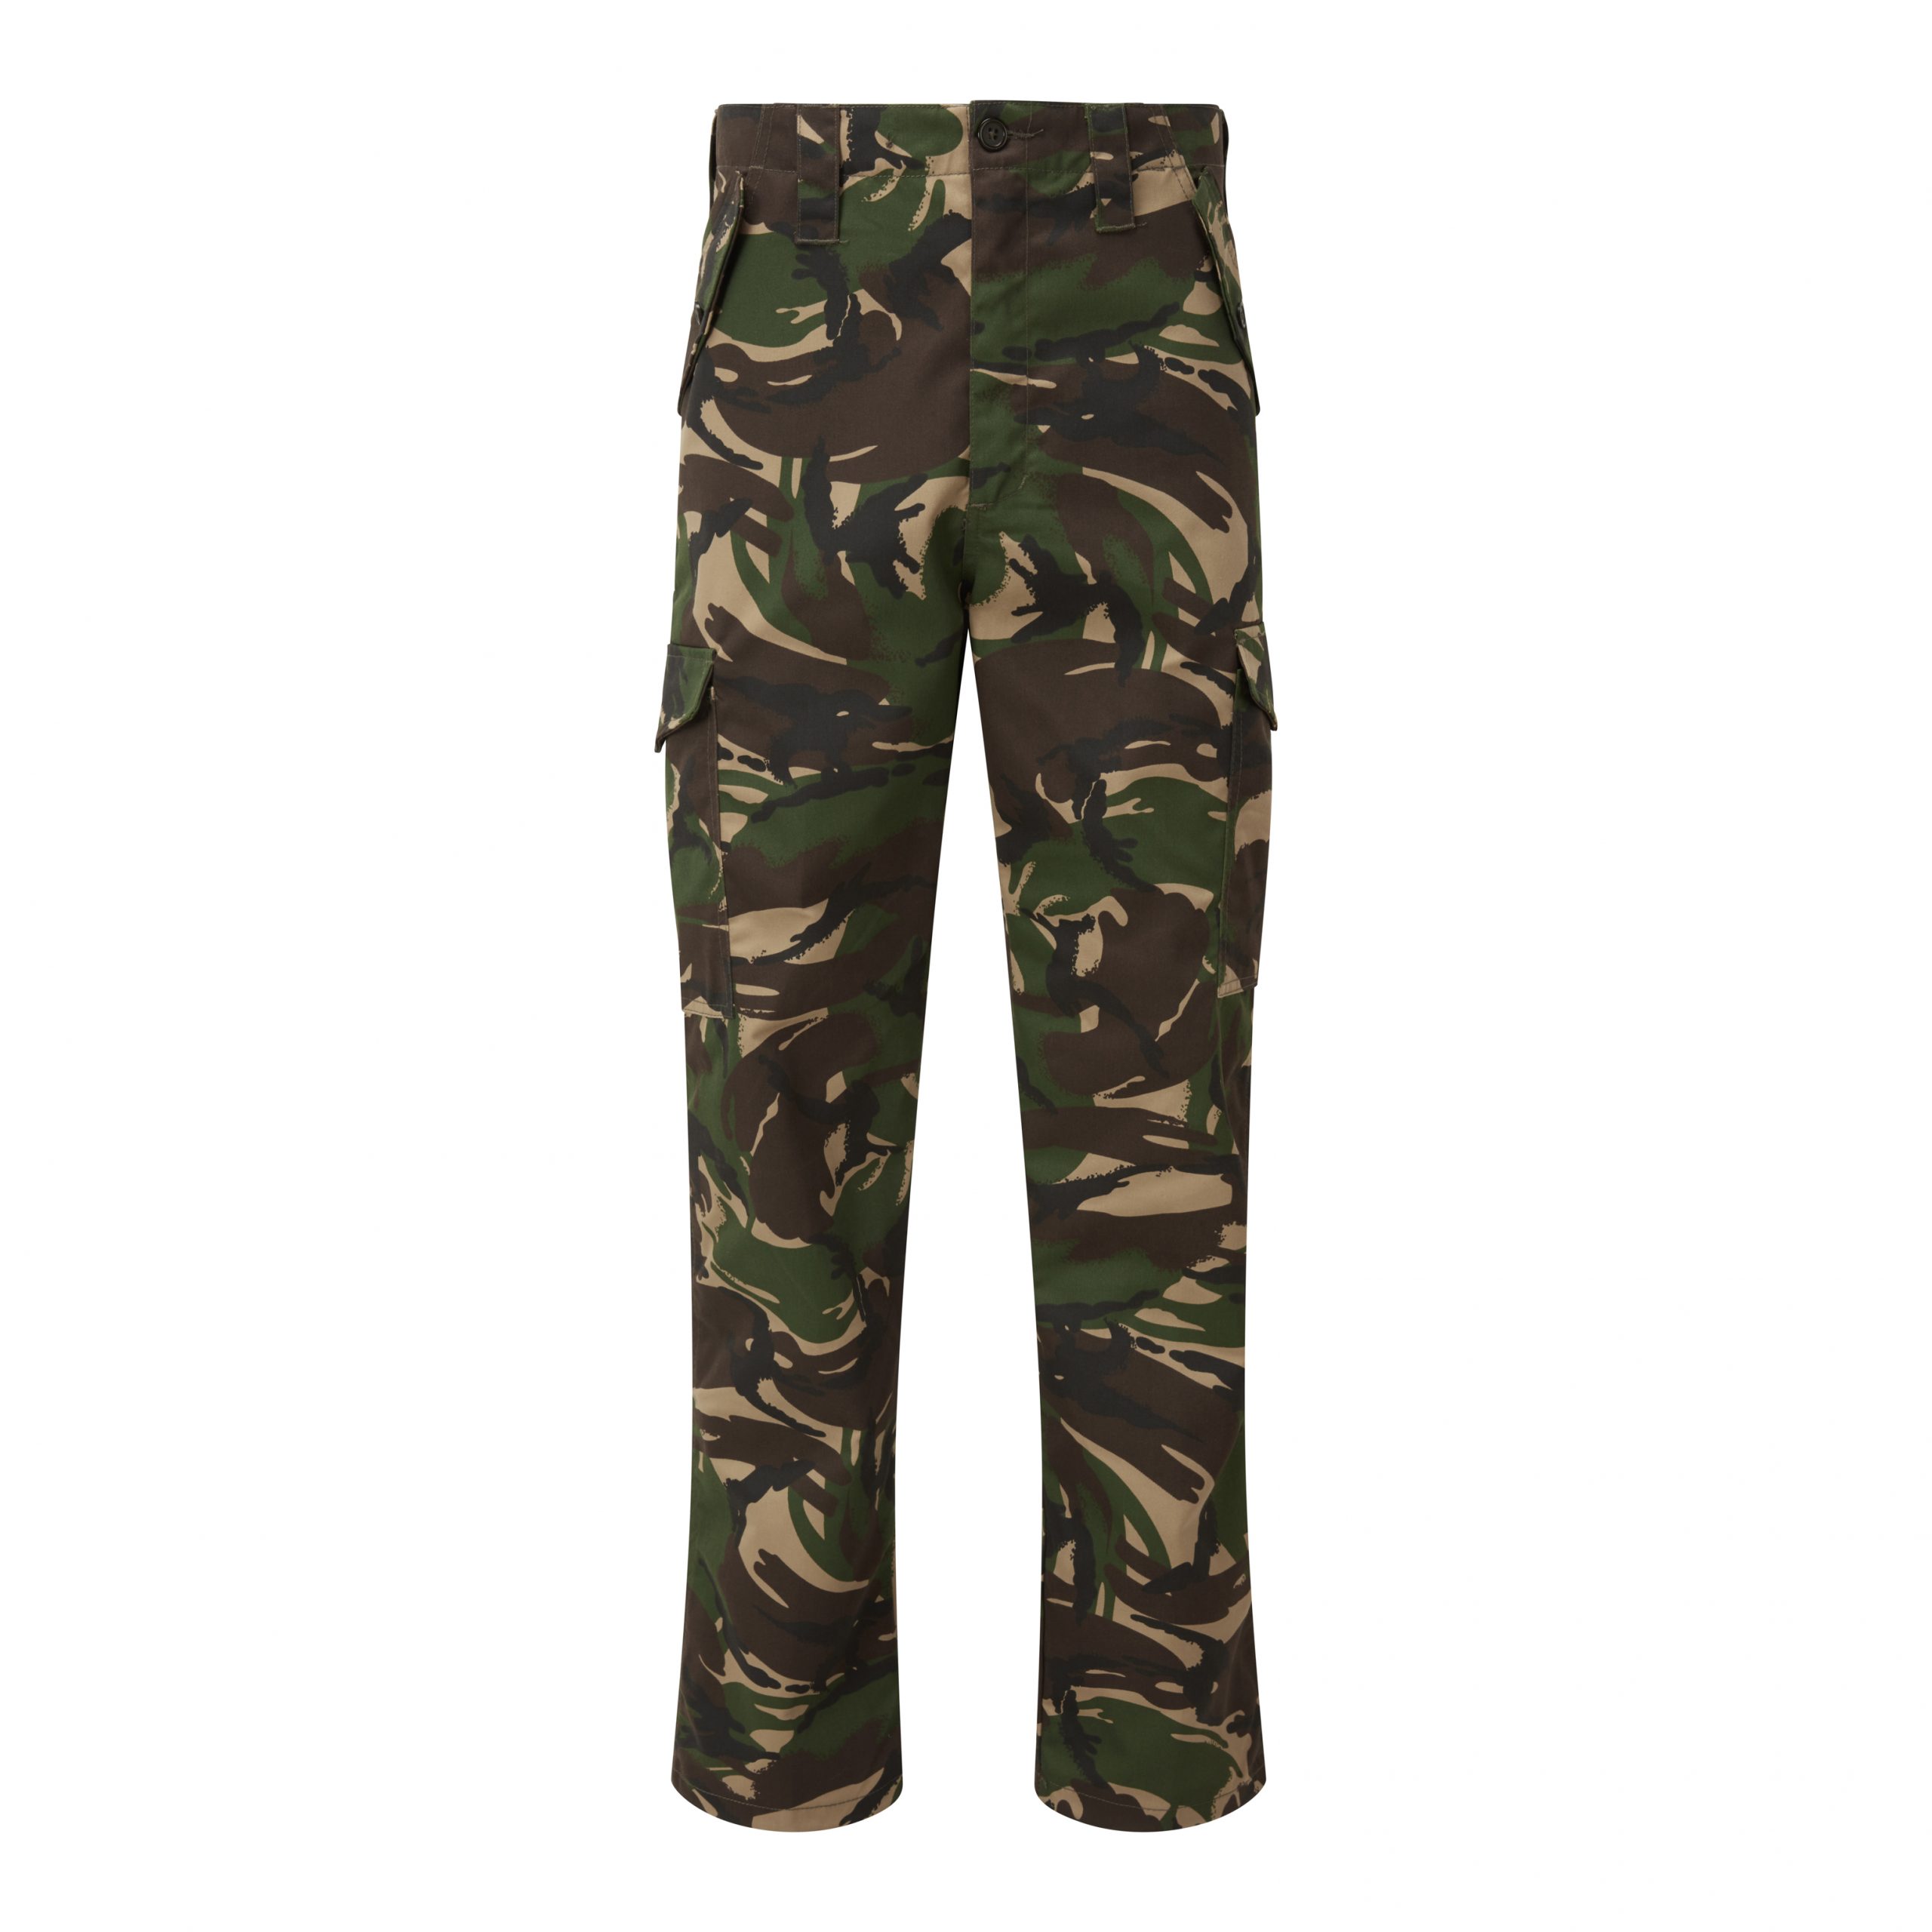 Discover more than 142 woodland camo trousers